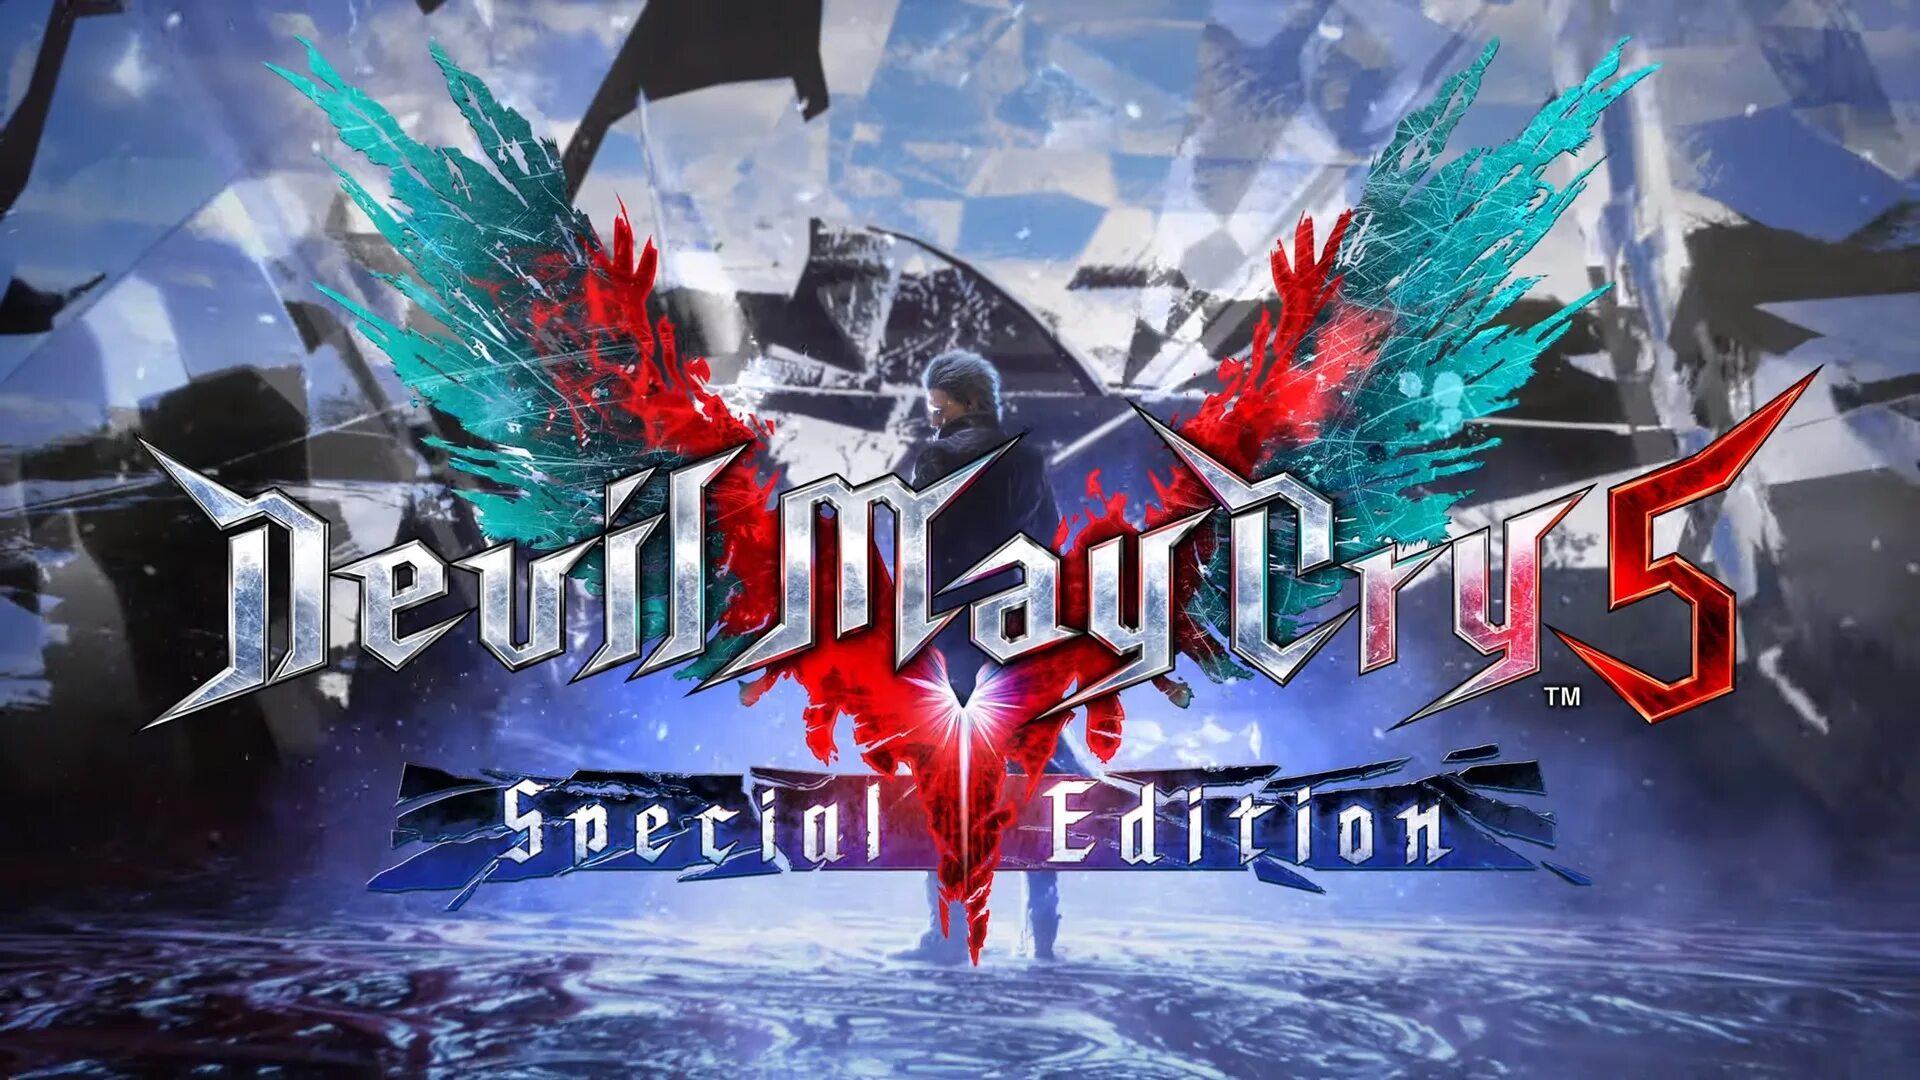 Special game edition. Devil May Cry 5 Special Edition. Devil May Cry 5 Special Edition ps5. Devil May Cry 5 Special Edition Xbox. Devil May Cry 5 Deluxe Edition.